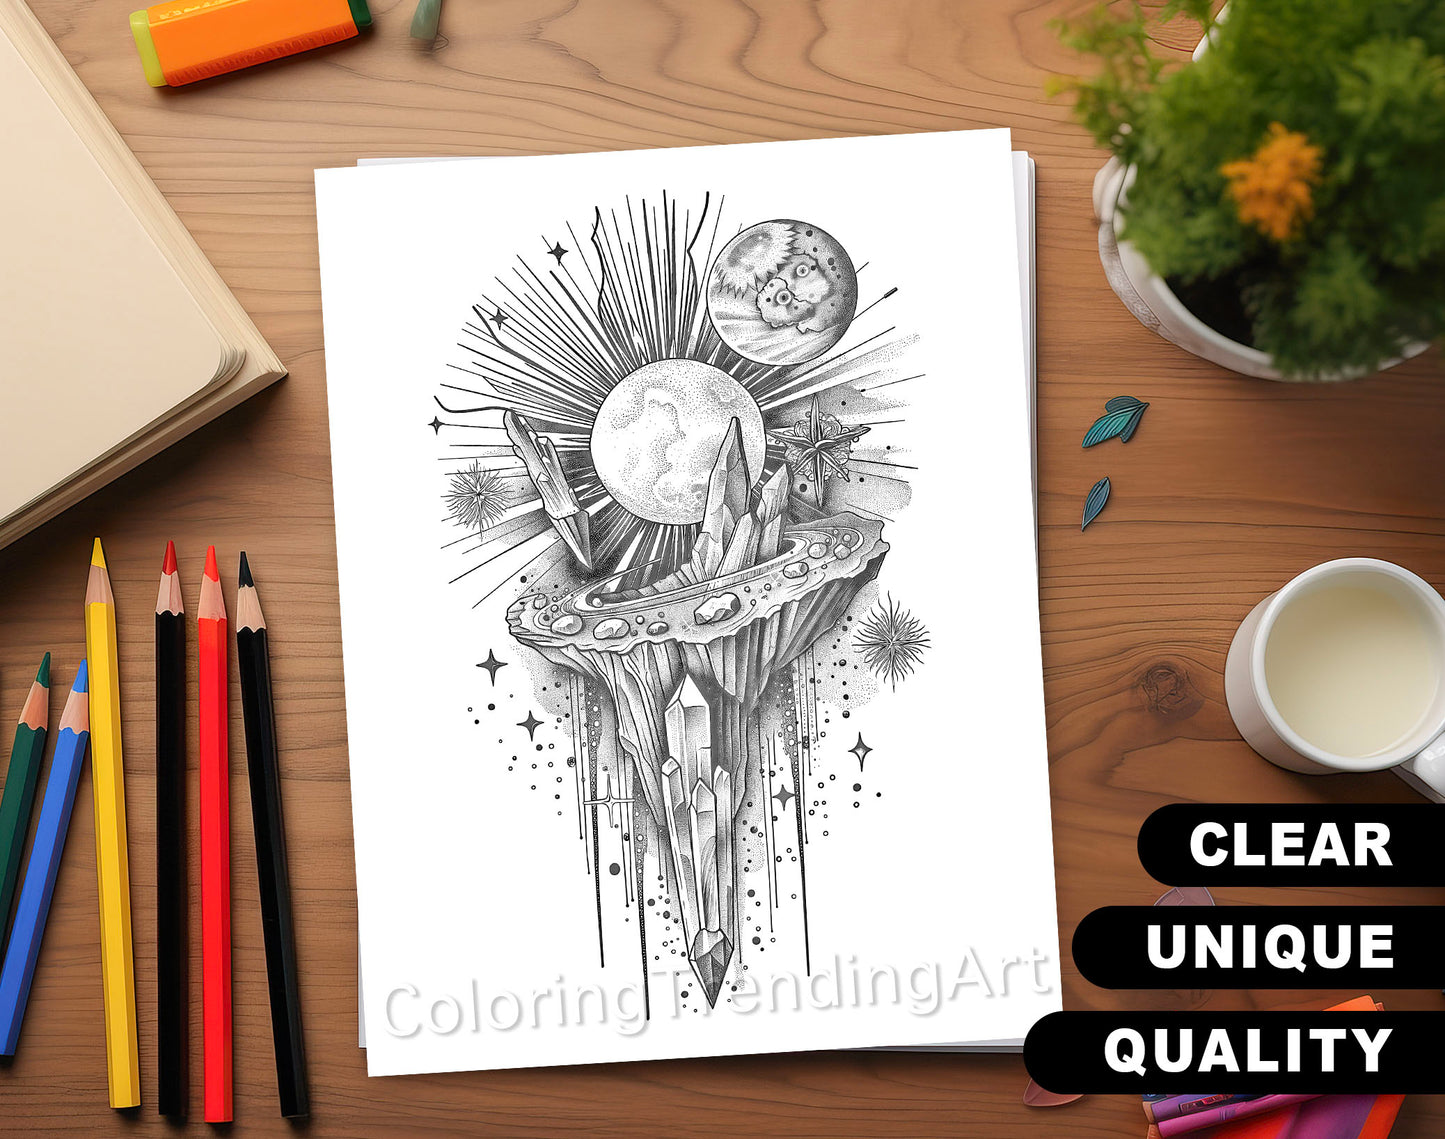 101 Tattoos Therapy 2 Grayscale Coloring Pages - Instant Download - Printable Dark/Light